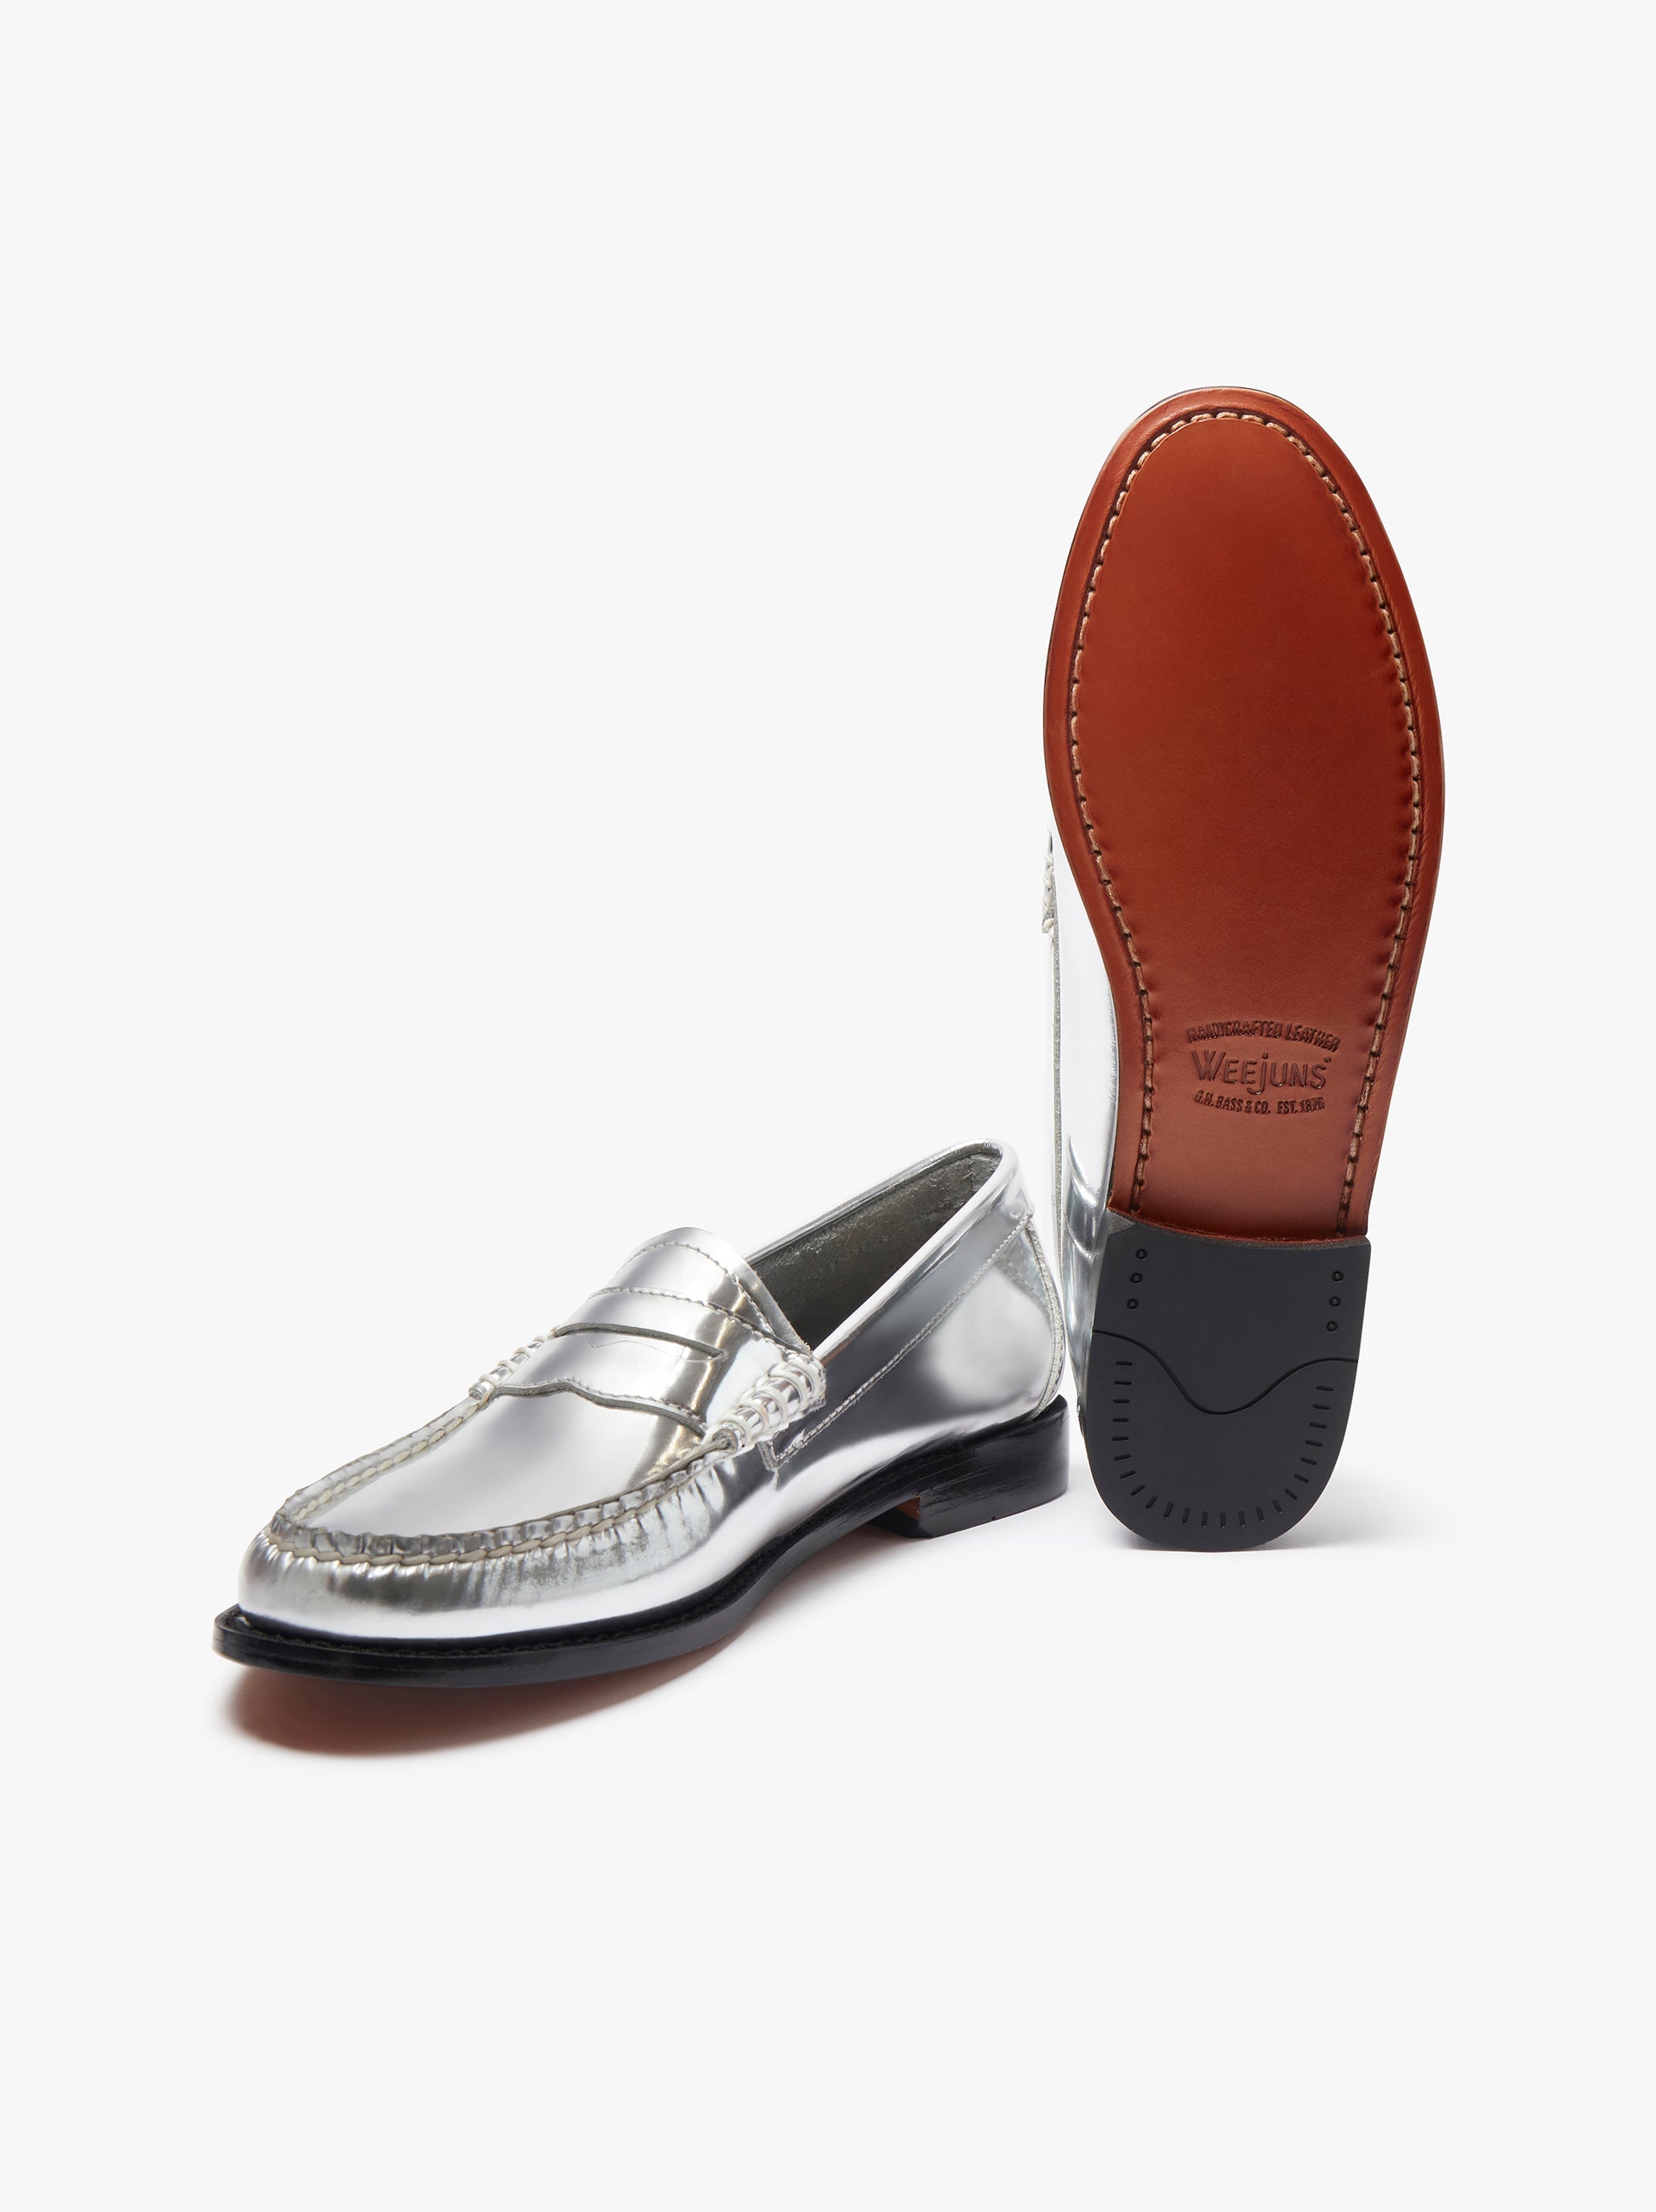 Weejuns Penny Loafers – G.H.BASS 1876